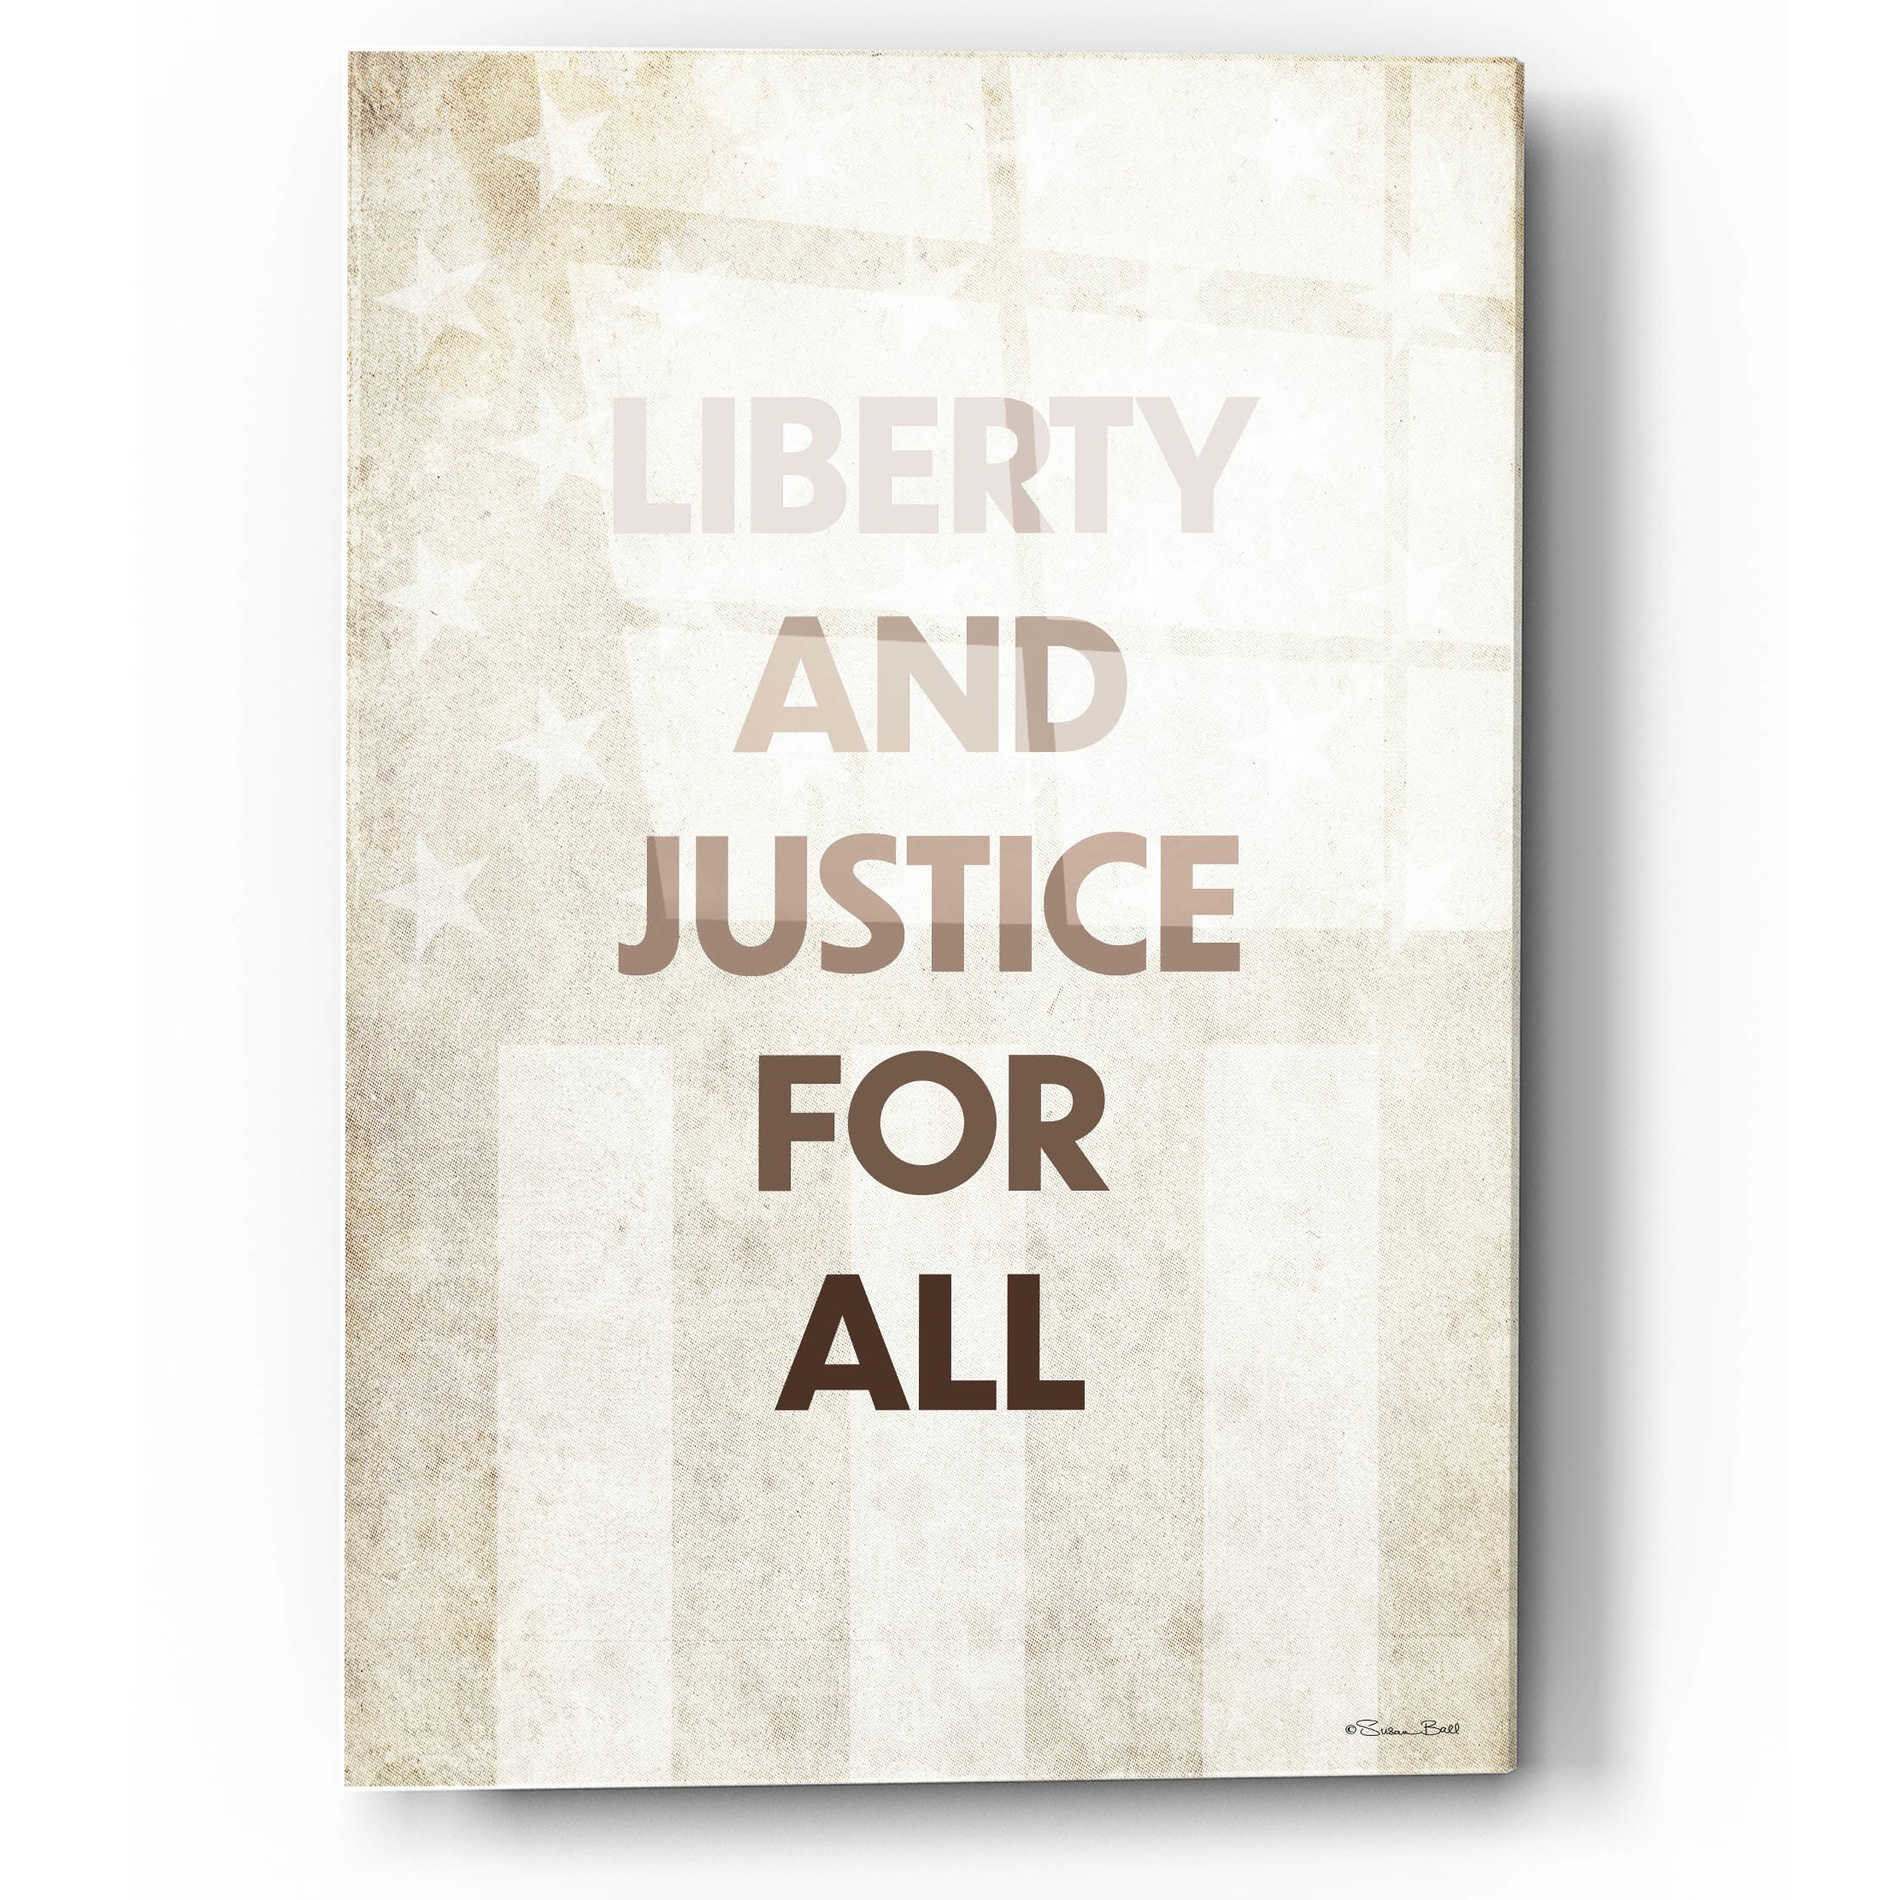 Epic Art 'Liberty and Justice For All' by Susan Ball, Acrylic Glass Wall Art,12x16